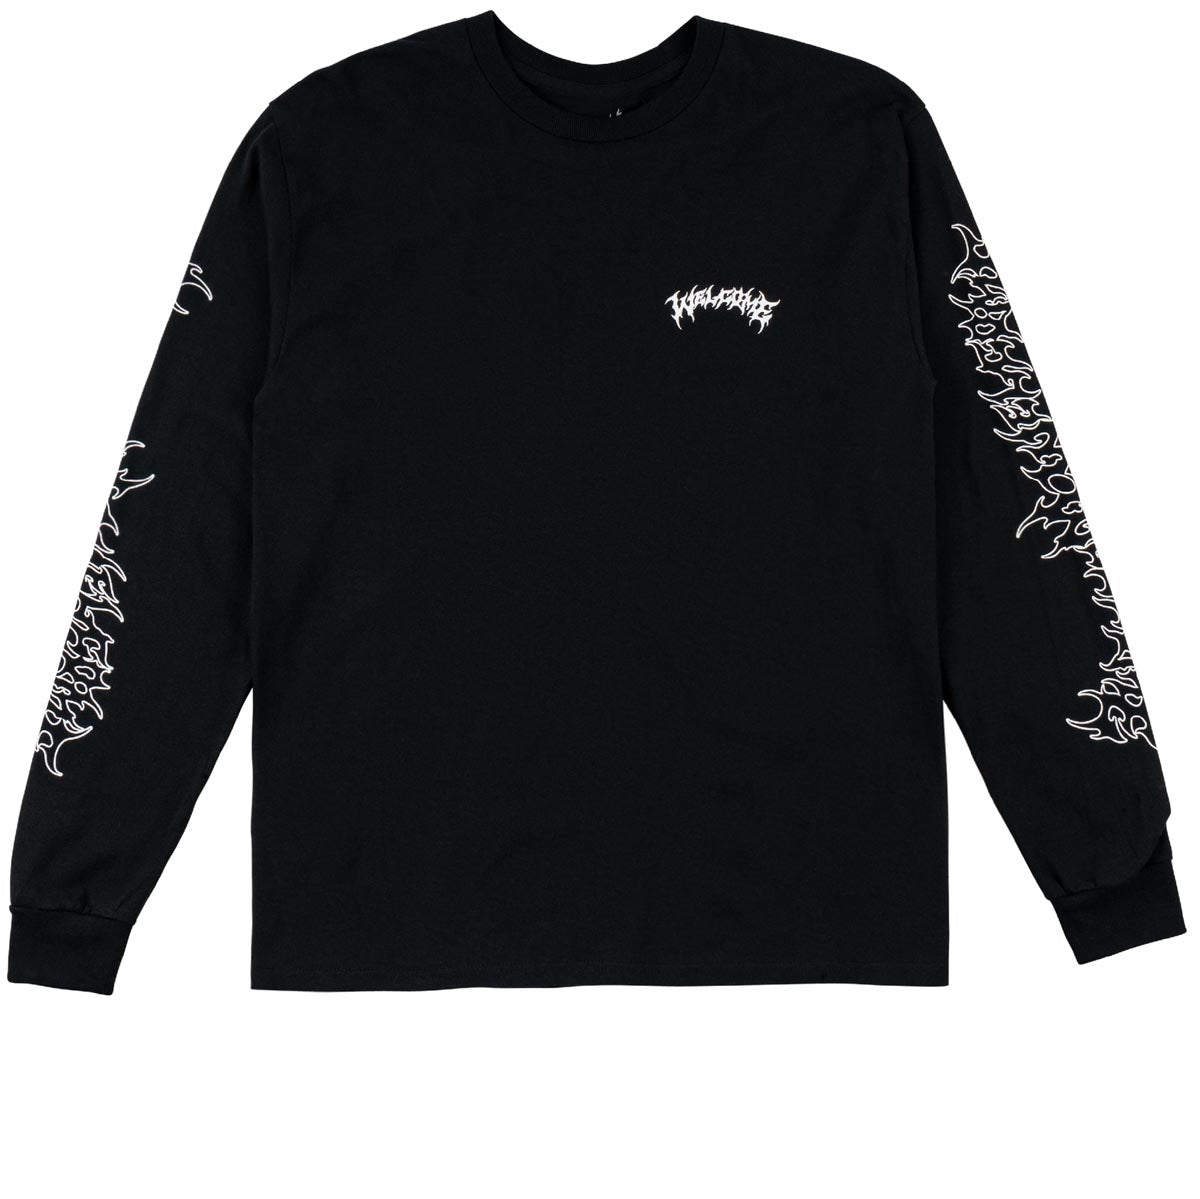 Welcome Barb Long Sleeve T-Shirt - Black/White image 1